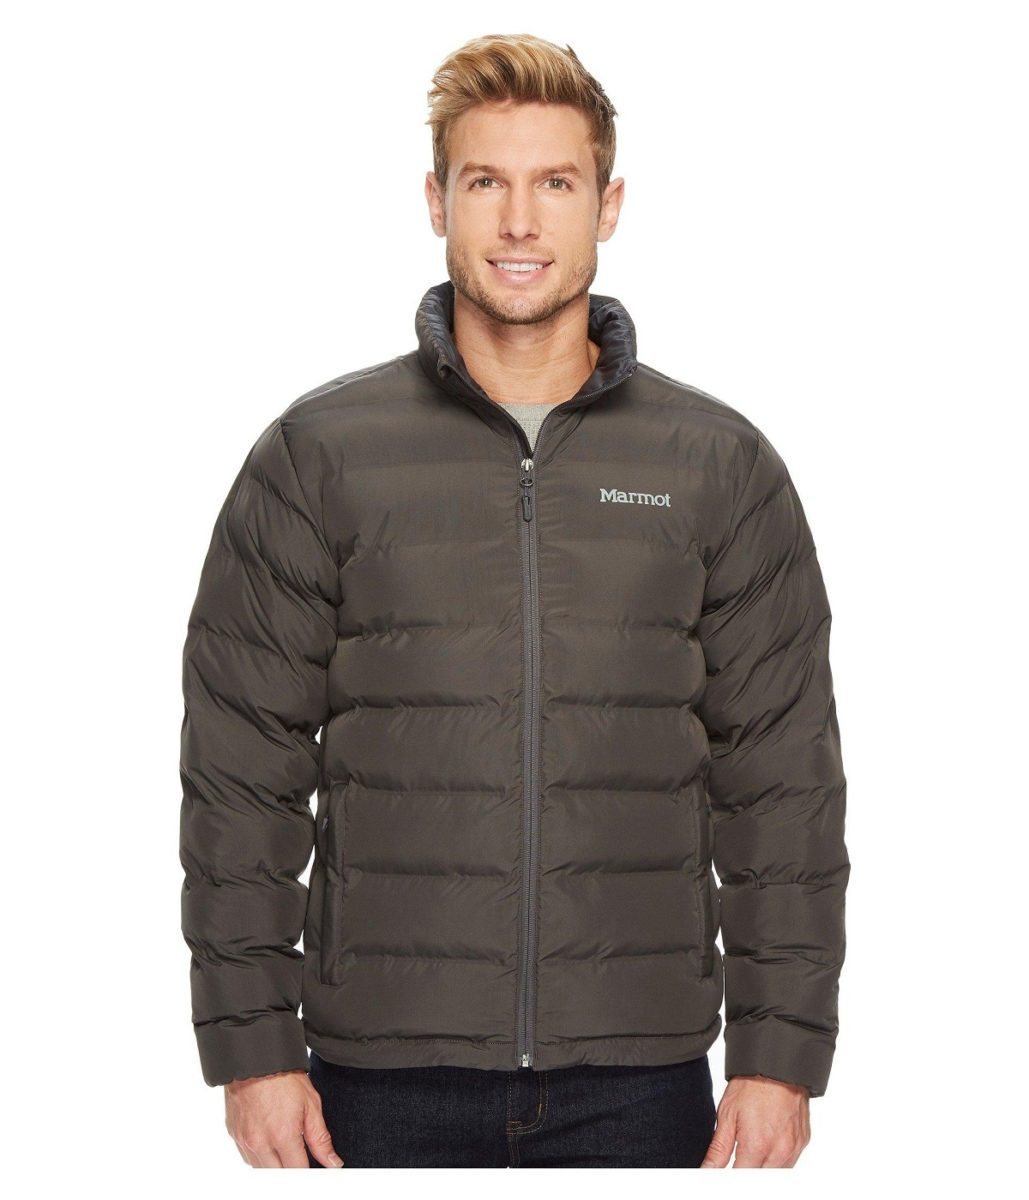 Marmot is great if you want an affordable men's puffer jacket.